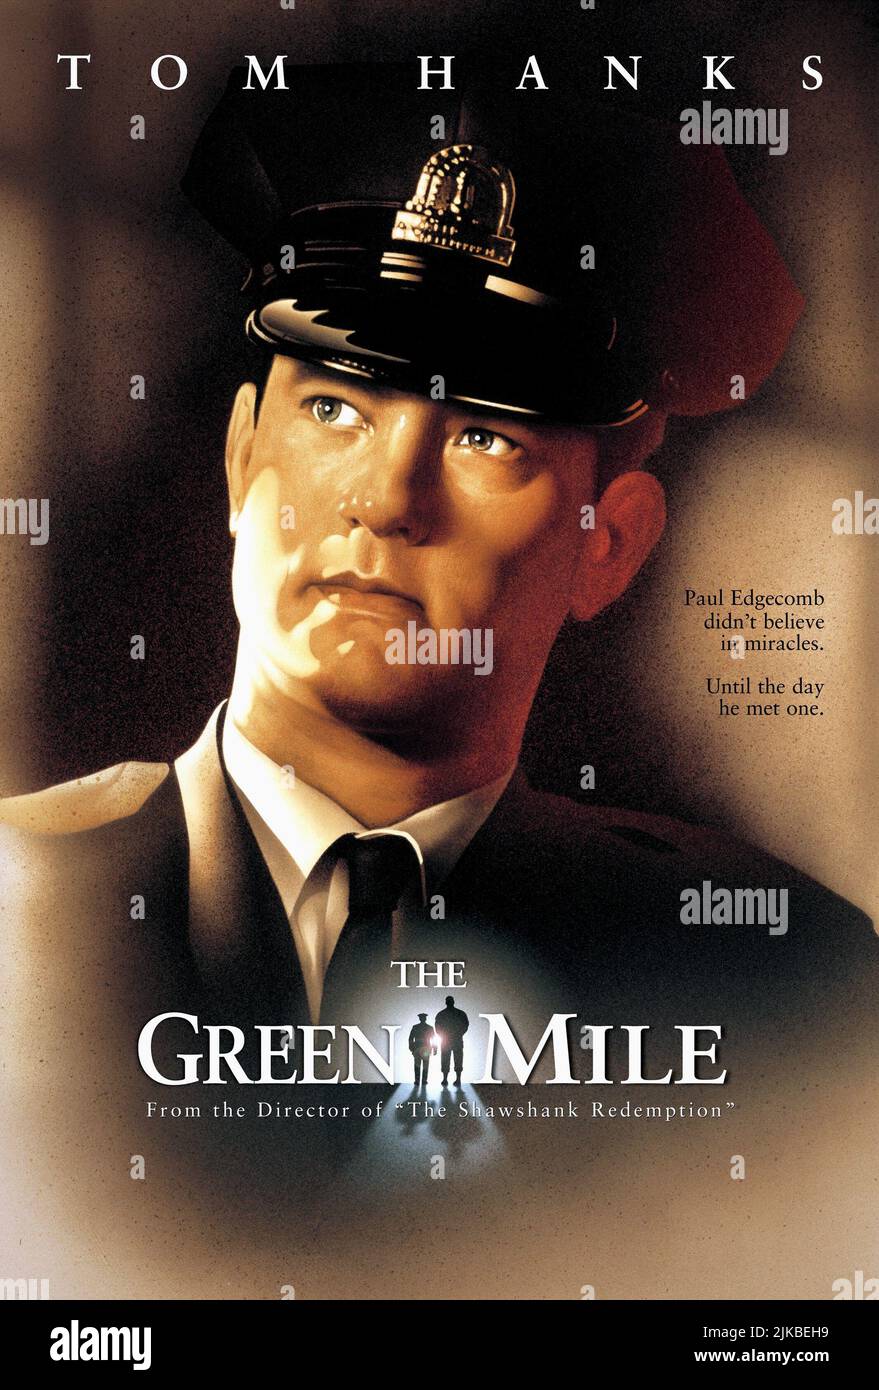 Tom Hanks Poster Film: The Green Mile (USA 1999) / Literaturverfilmung  (Based On The Book By Stephen King) Director: Frank Darabont 06 December  1999 **WARNING** This Photograph is for editorial use only